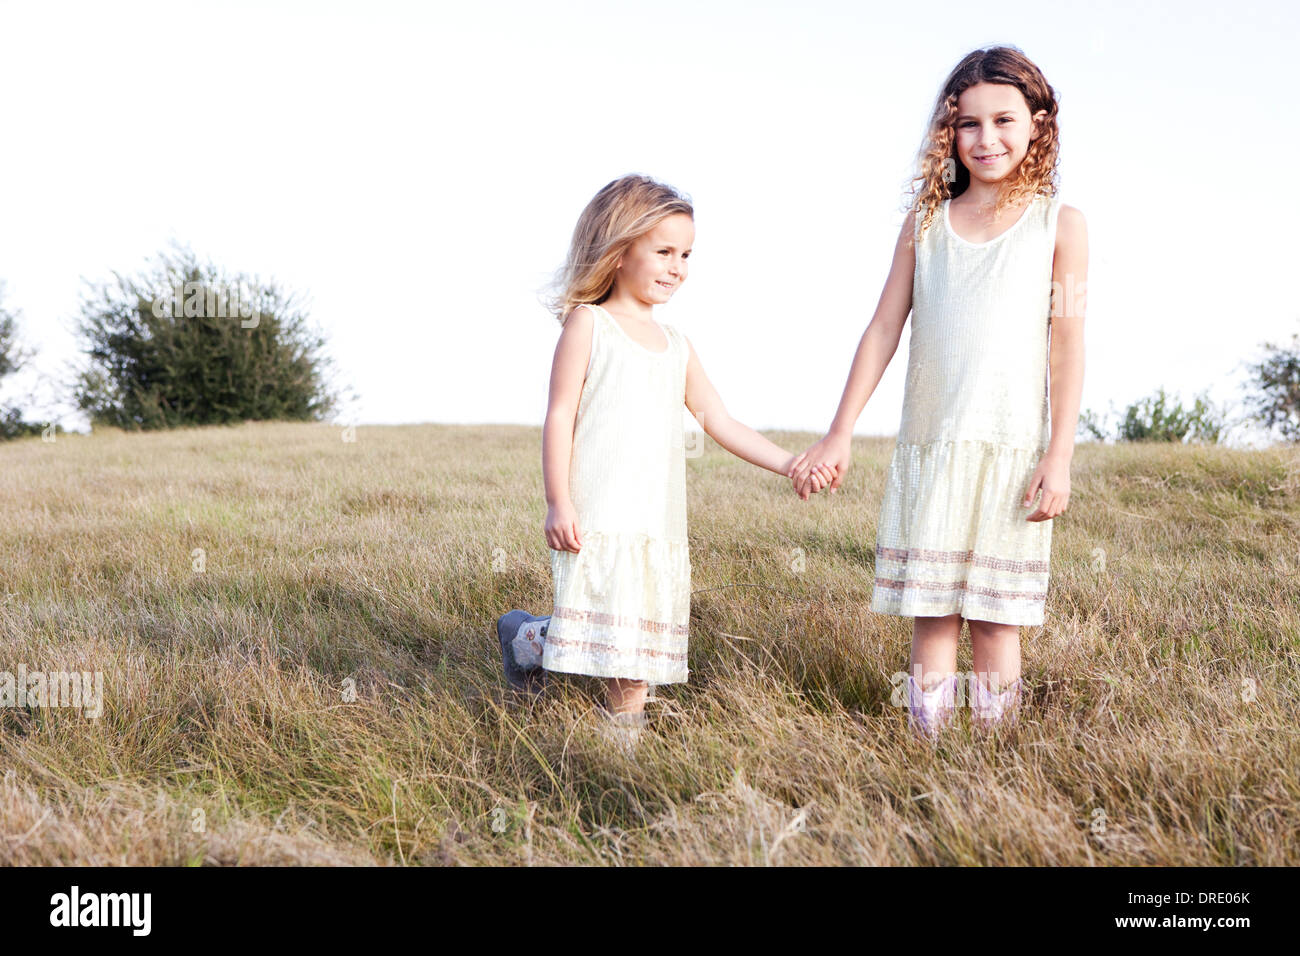 Sisters in dresses standing in field Stock Photo